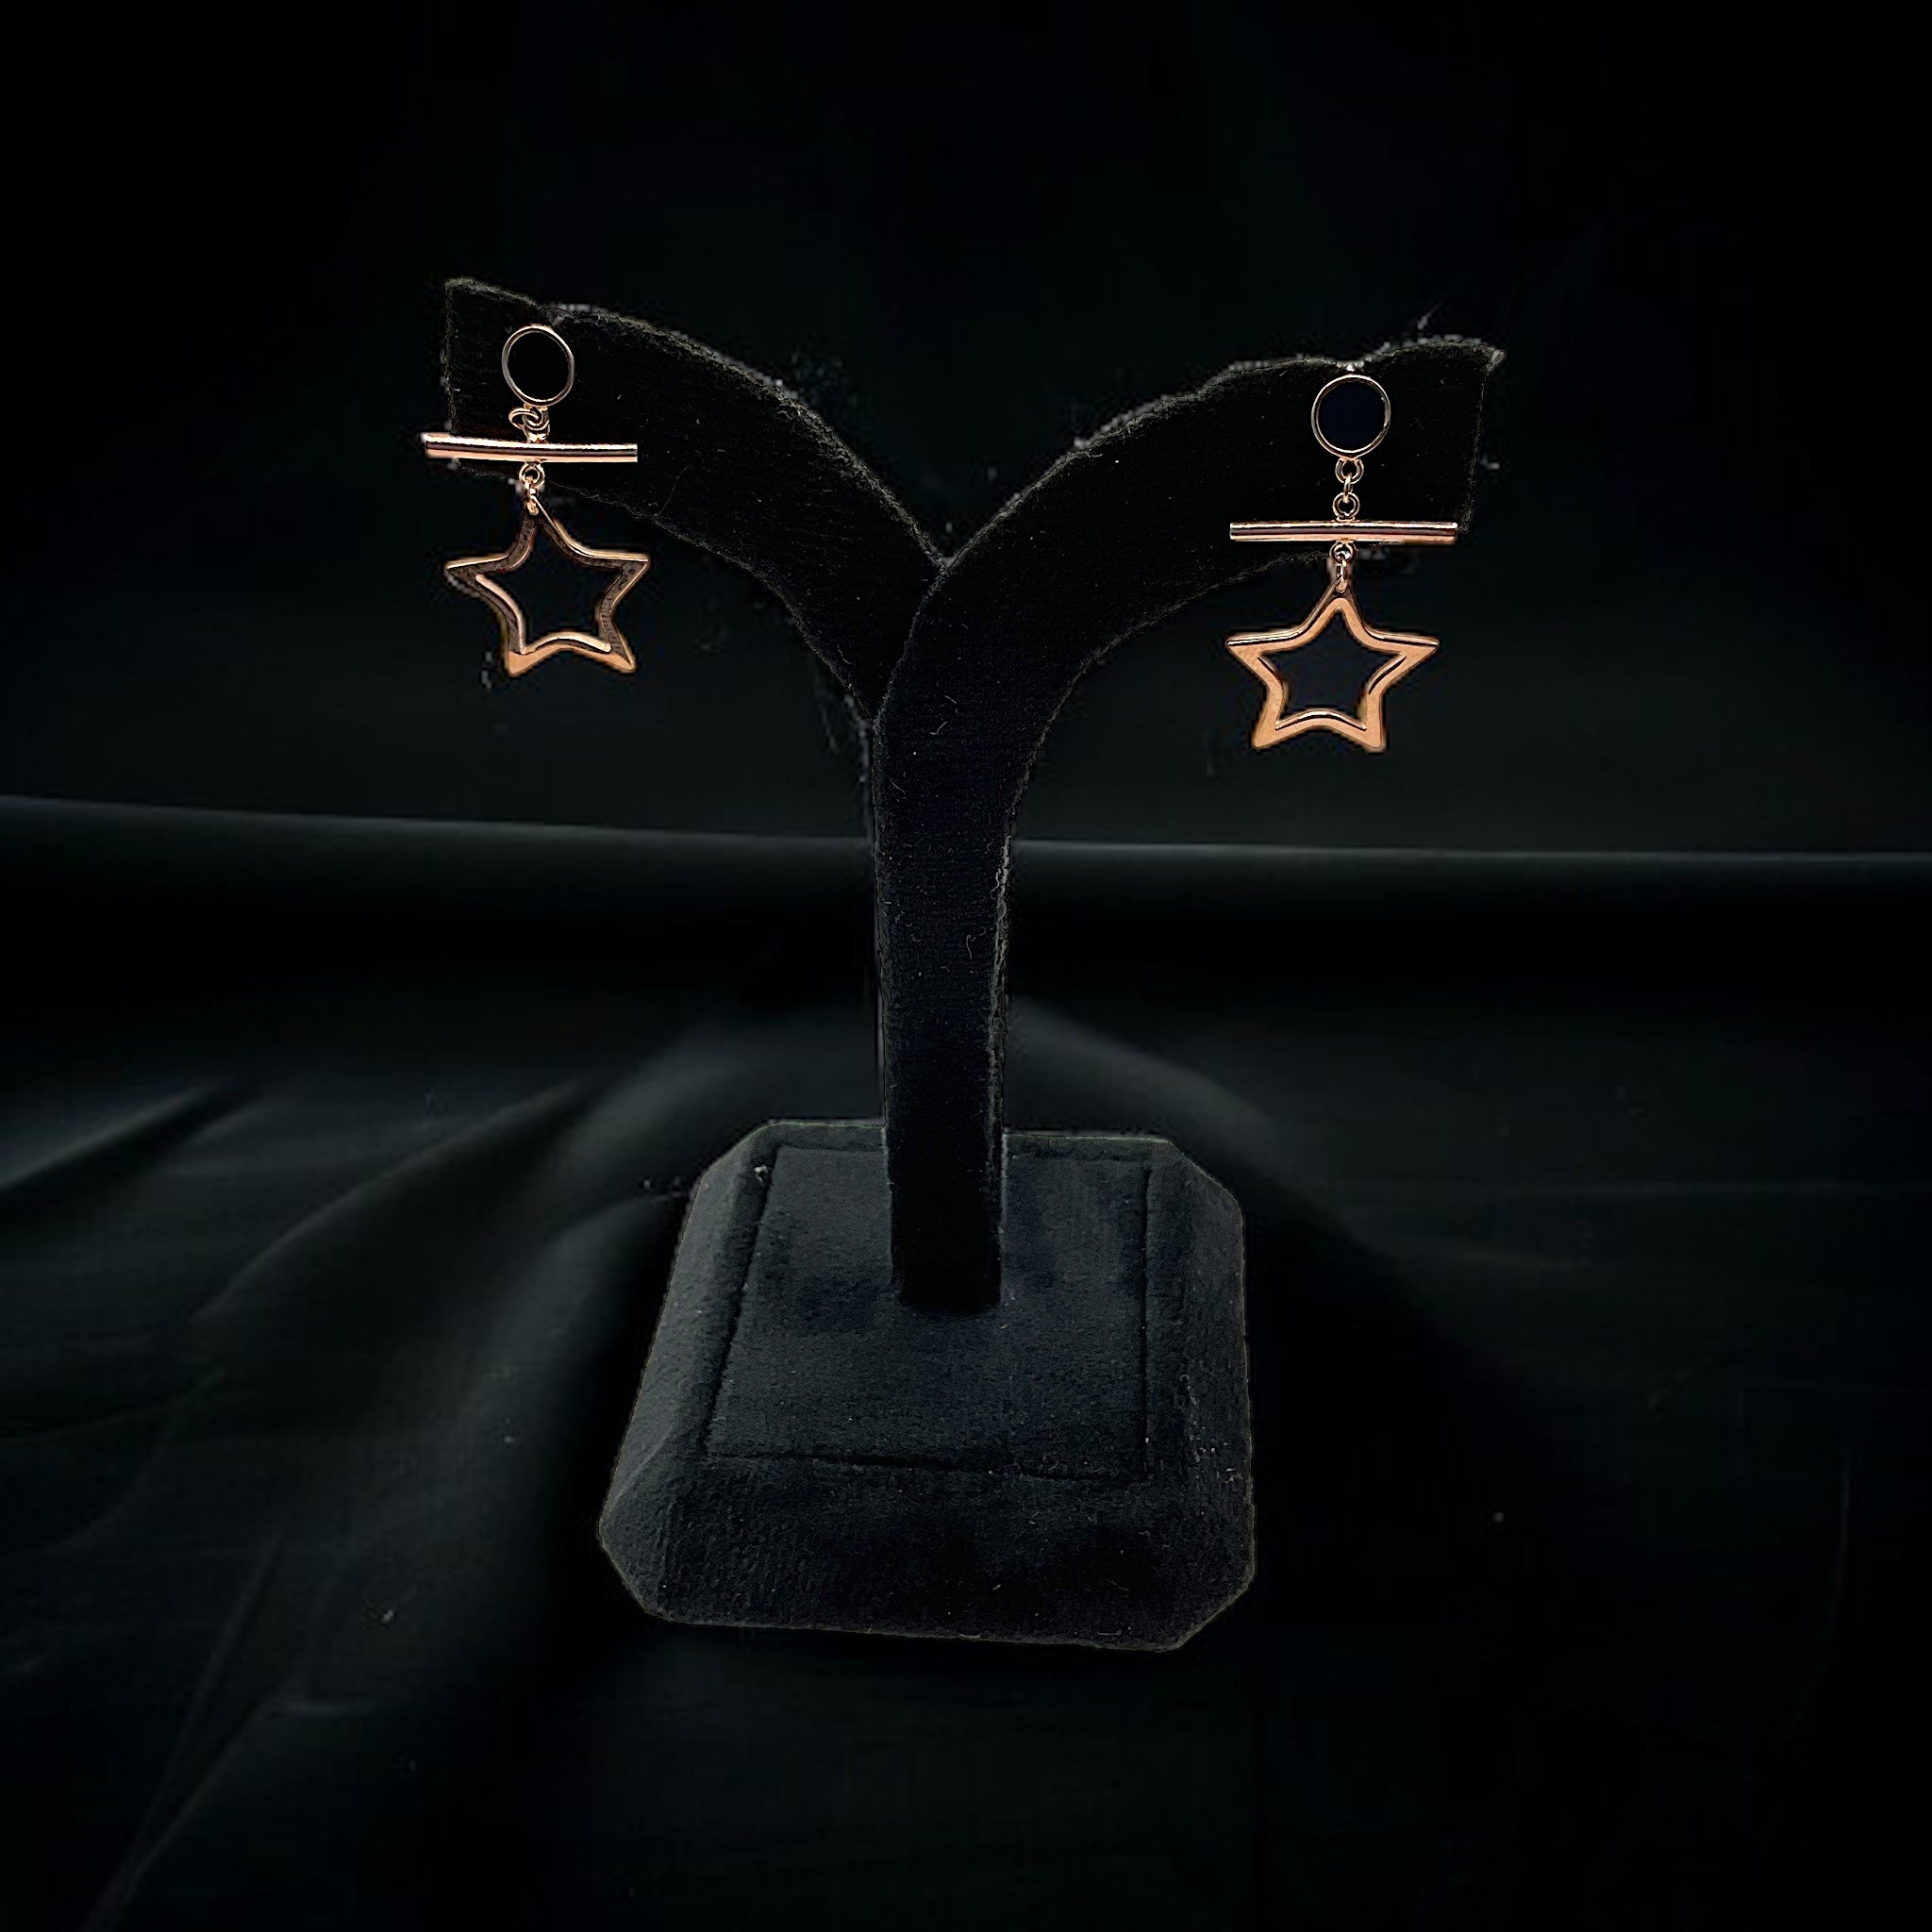 a pair of earrings on a stand on a black background